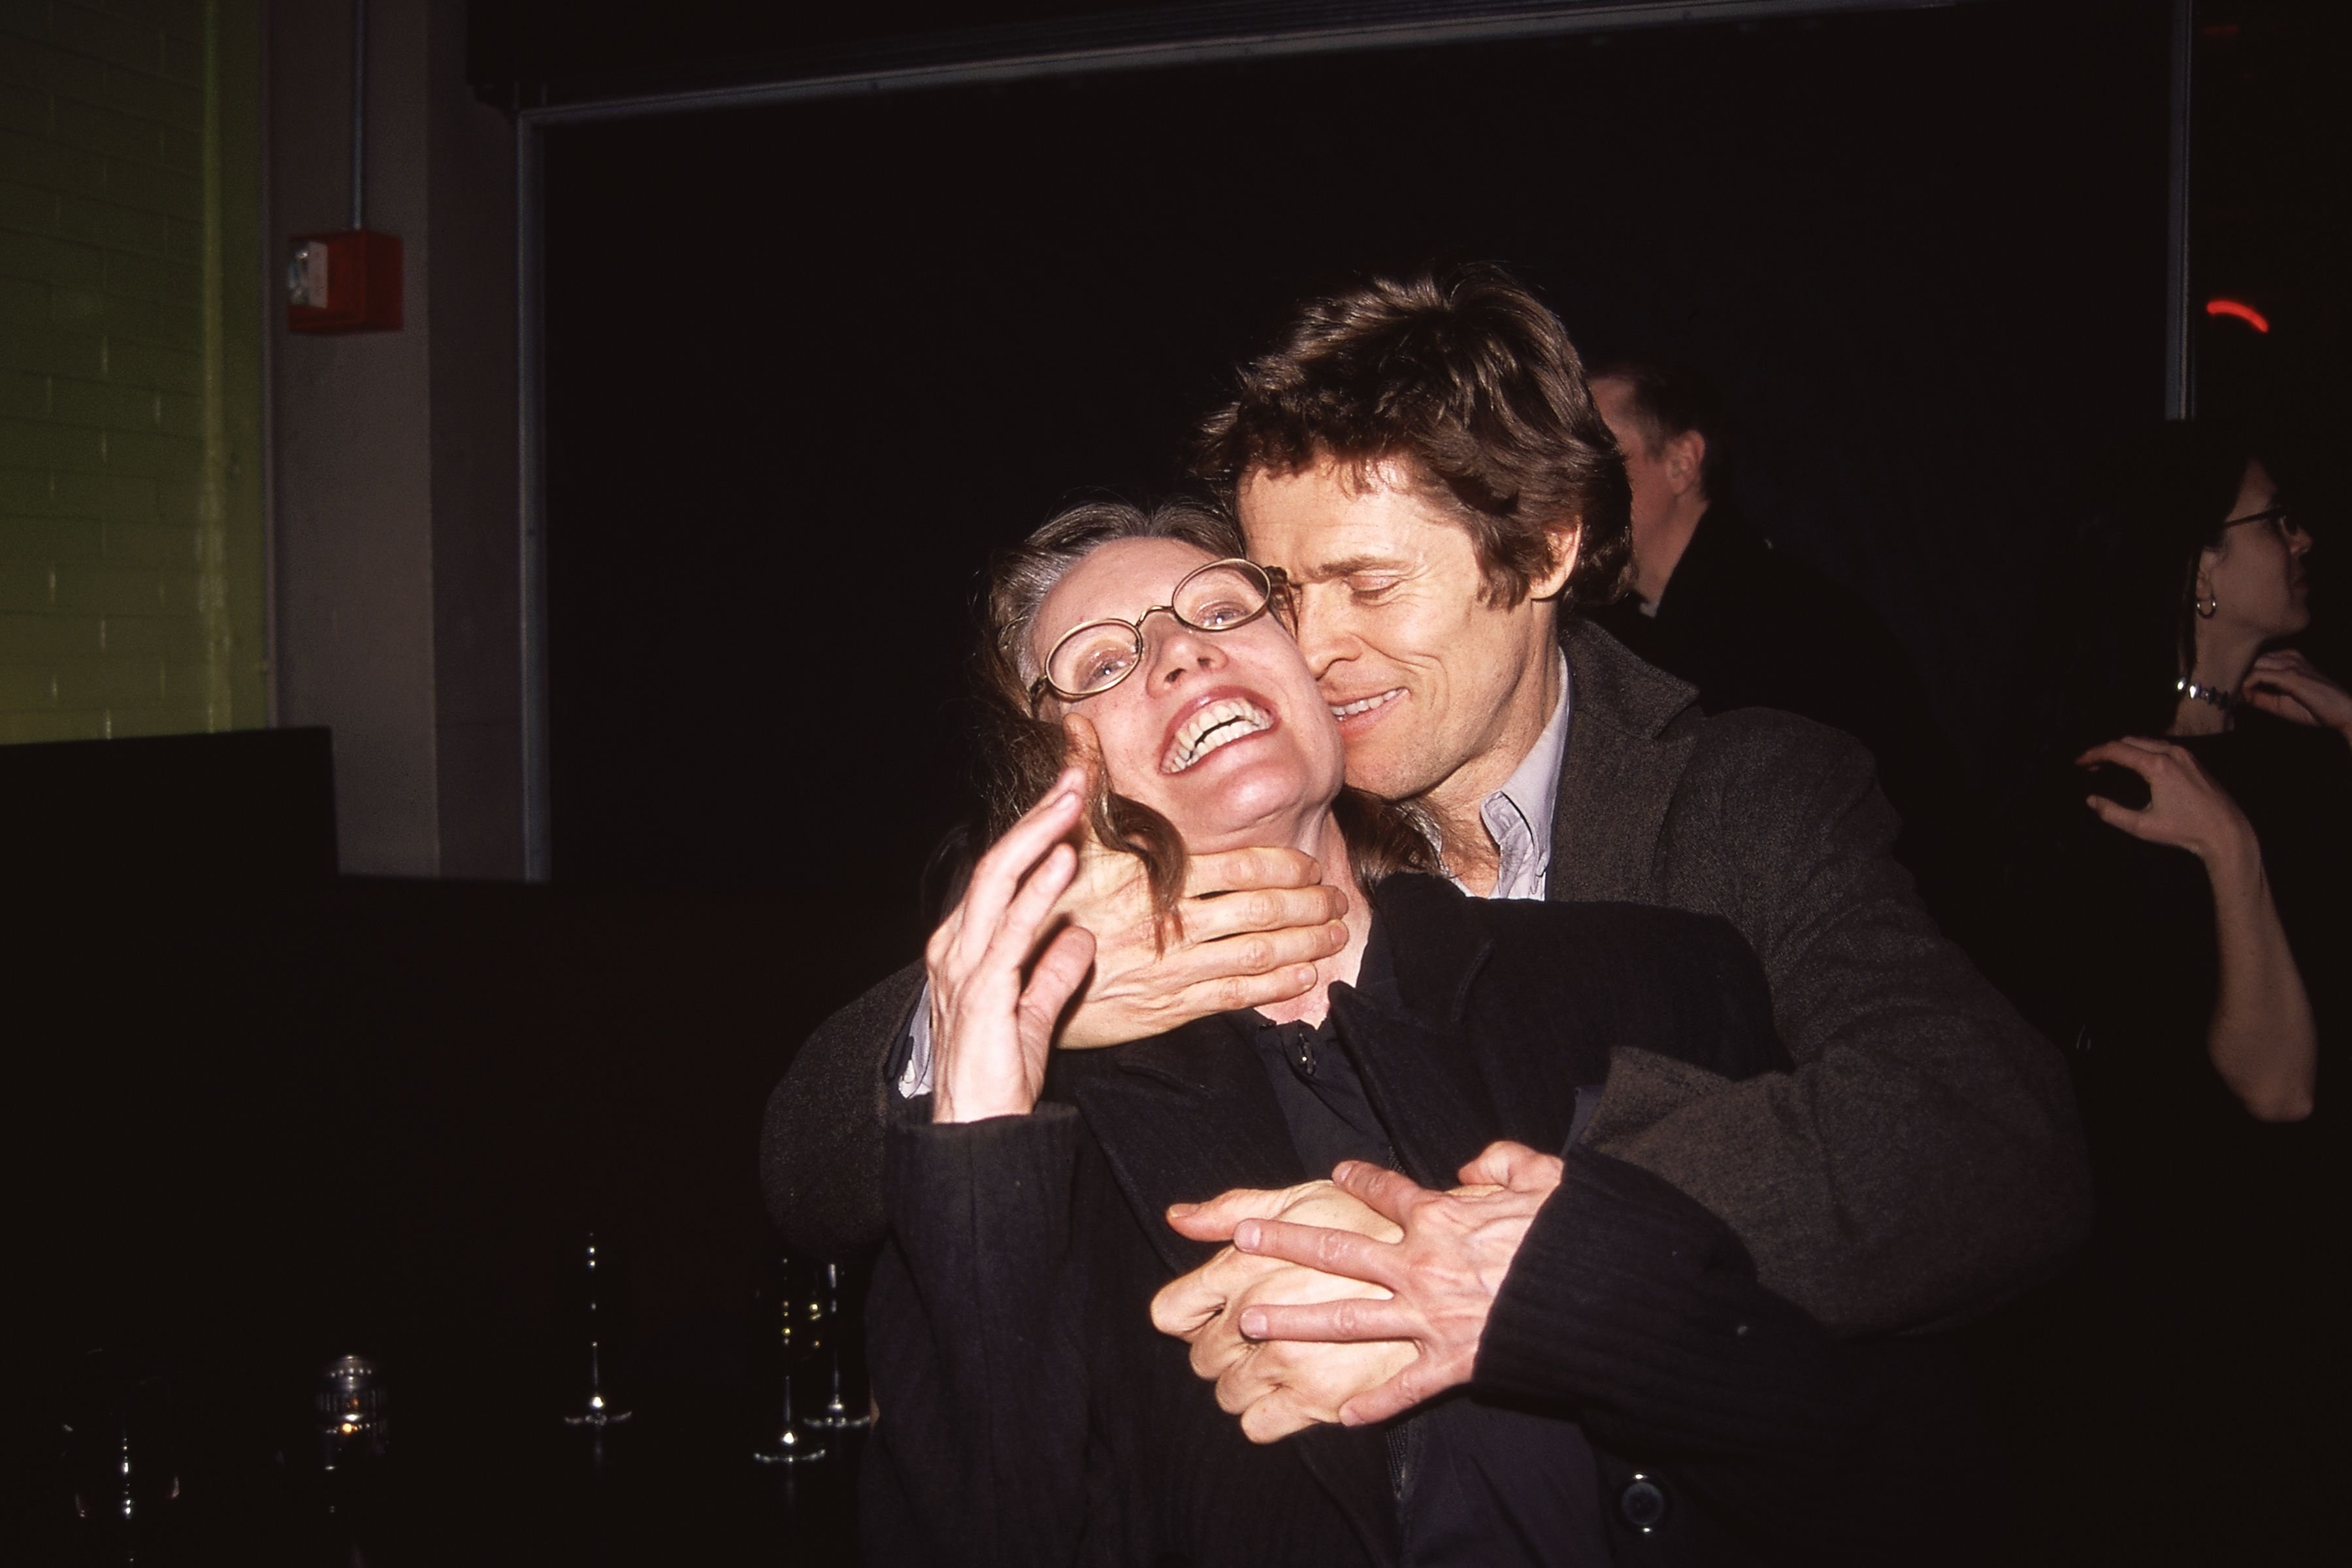 Elizabeth LeCompte and Willem Dafoe during a Wooster Group Event on April 12, 2000, in New York City. | Source: Getty Images